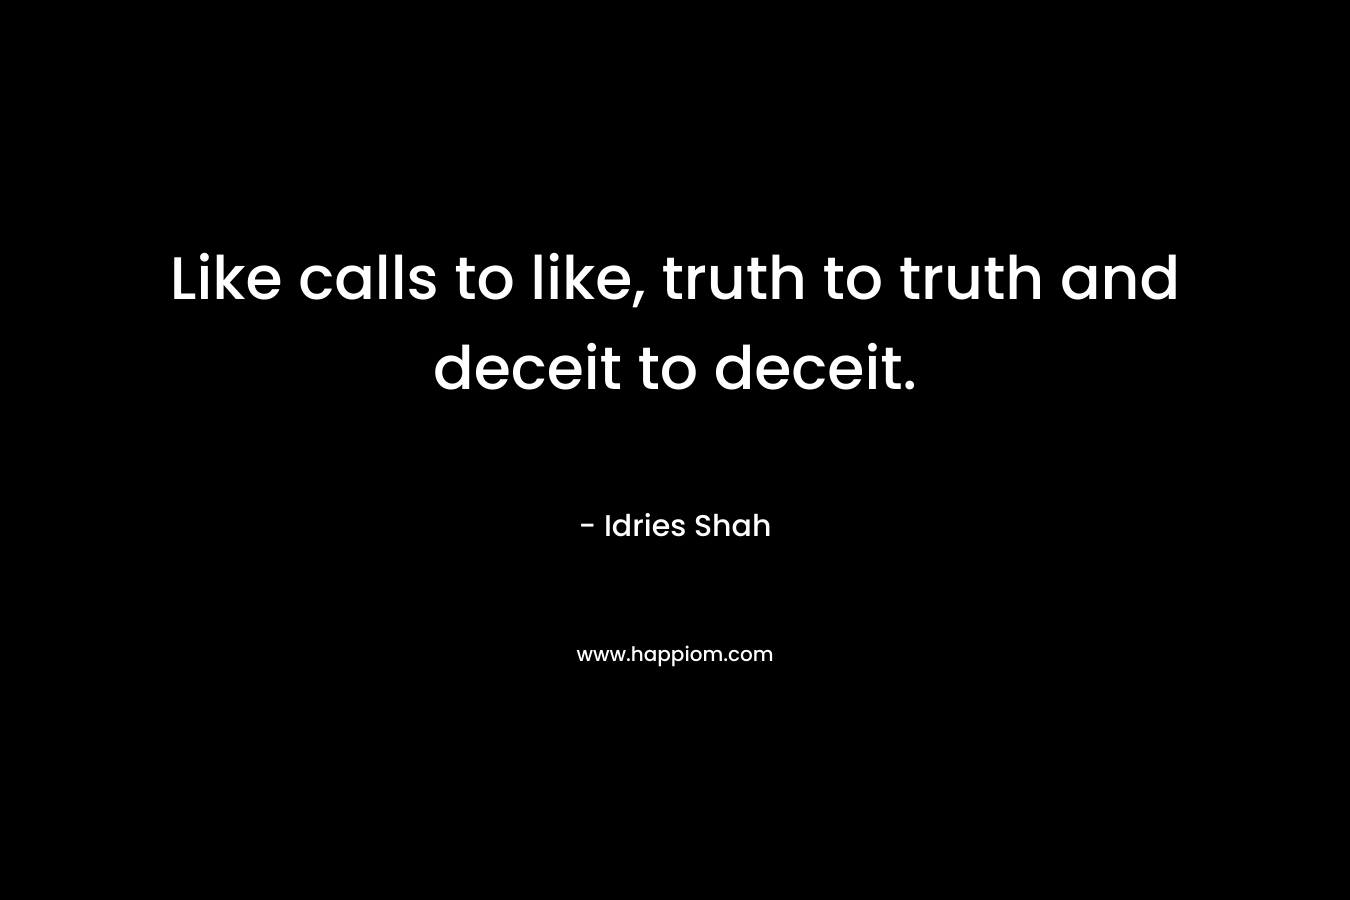 Like calls to like, truth to truth and deceit to deceit.